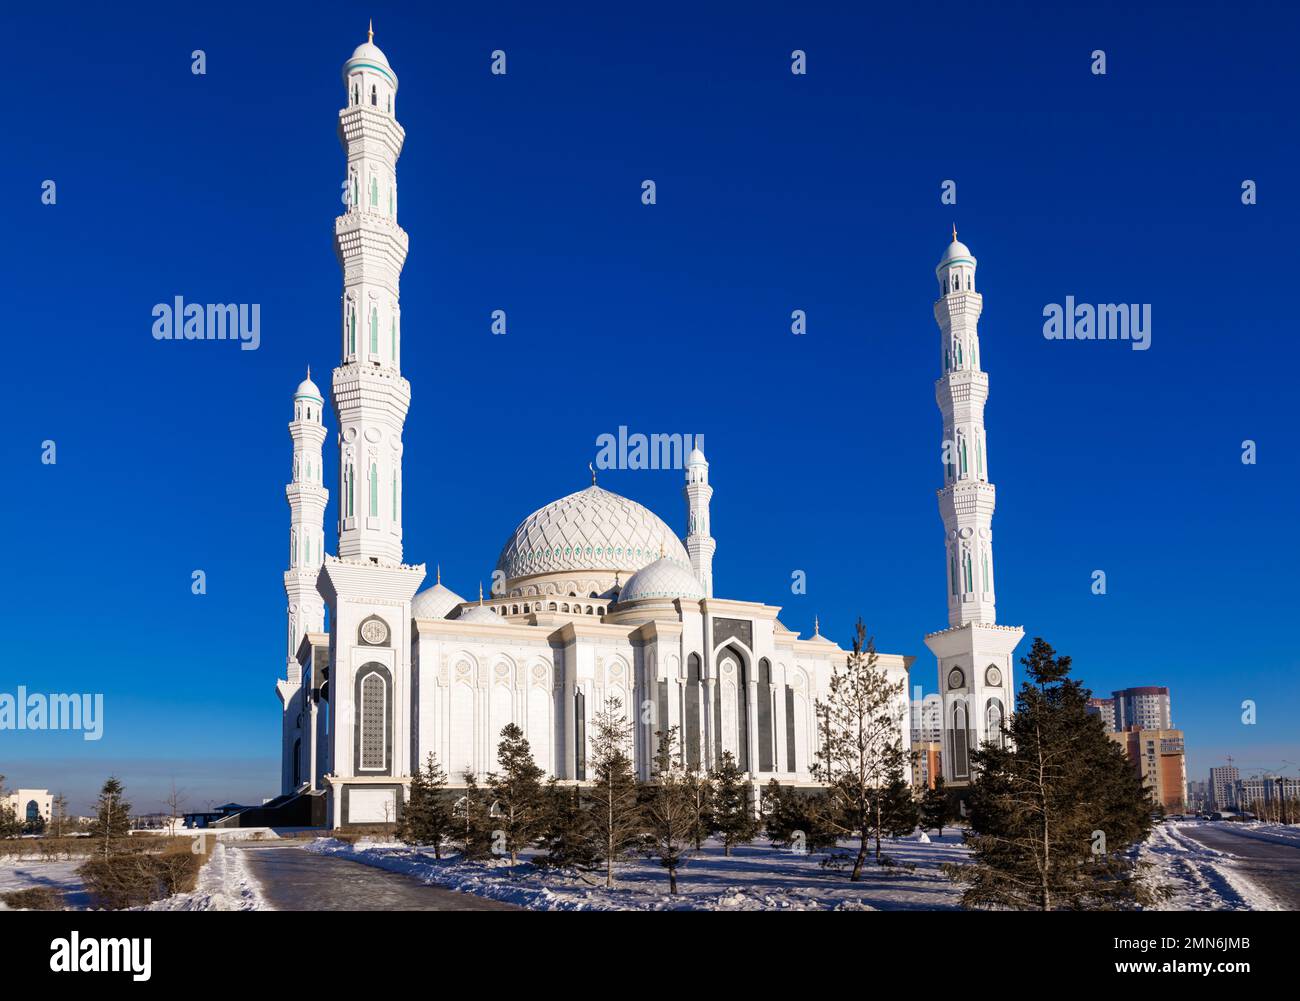 Classical Islamic style with traditional Kazakh ornaments Hazrat Sultan (Holy Sultan) Mosque in Astana Kazakhstan Stock Photo